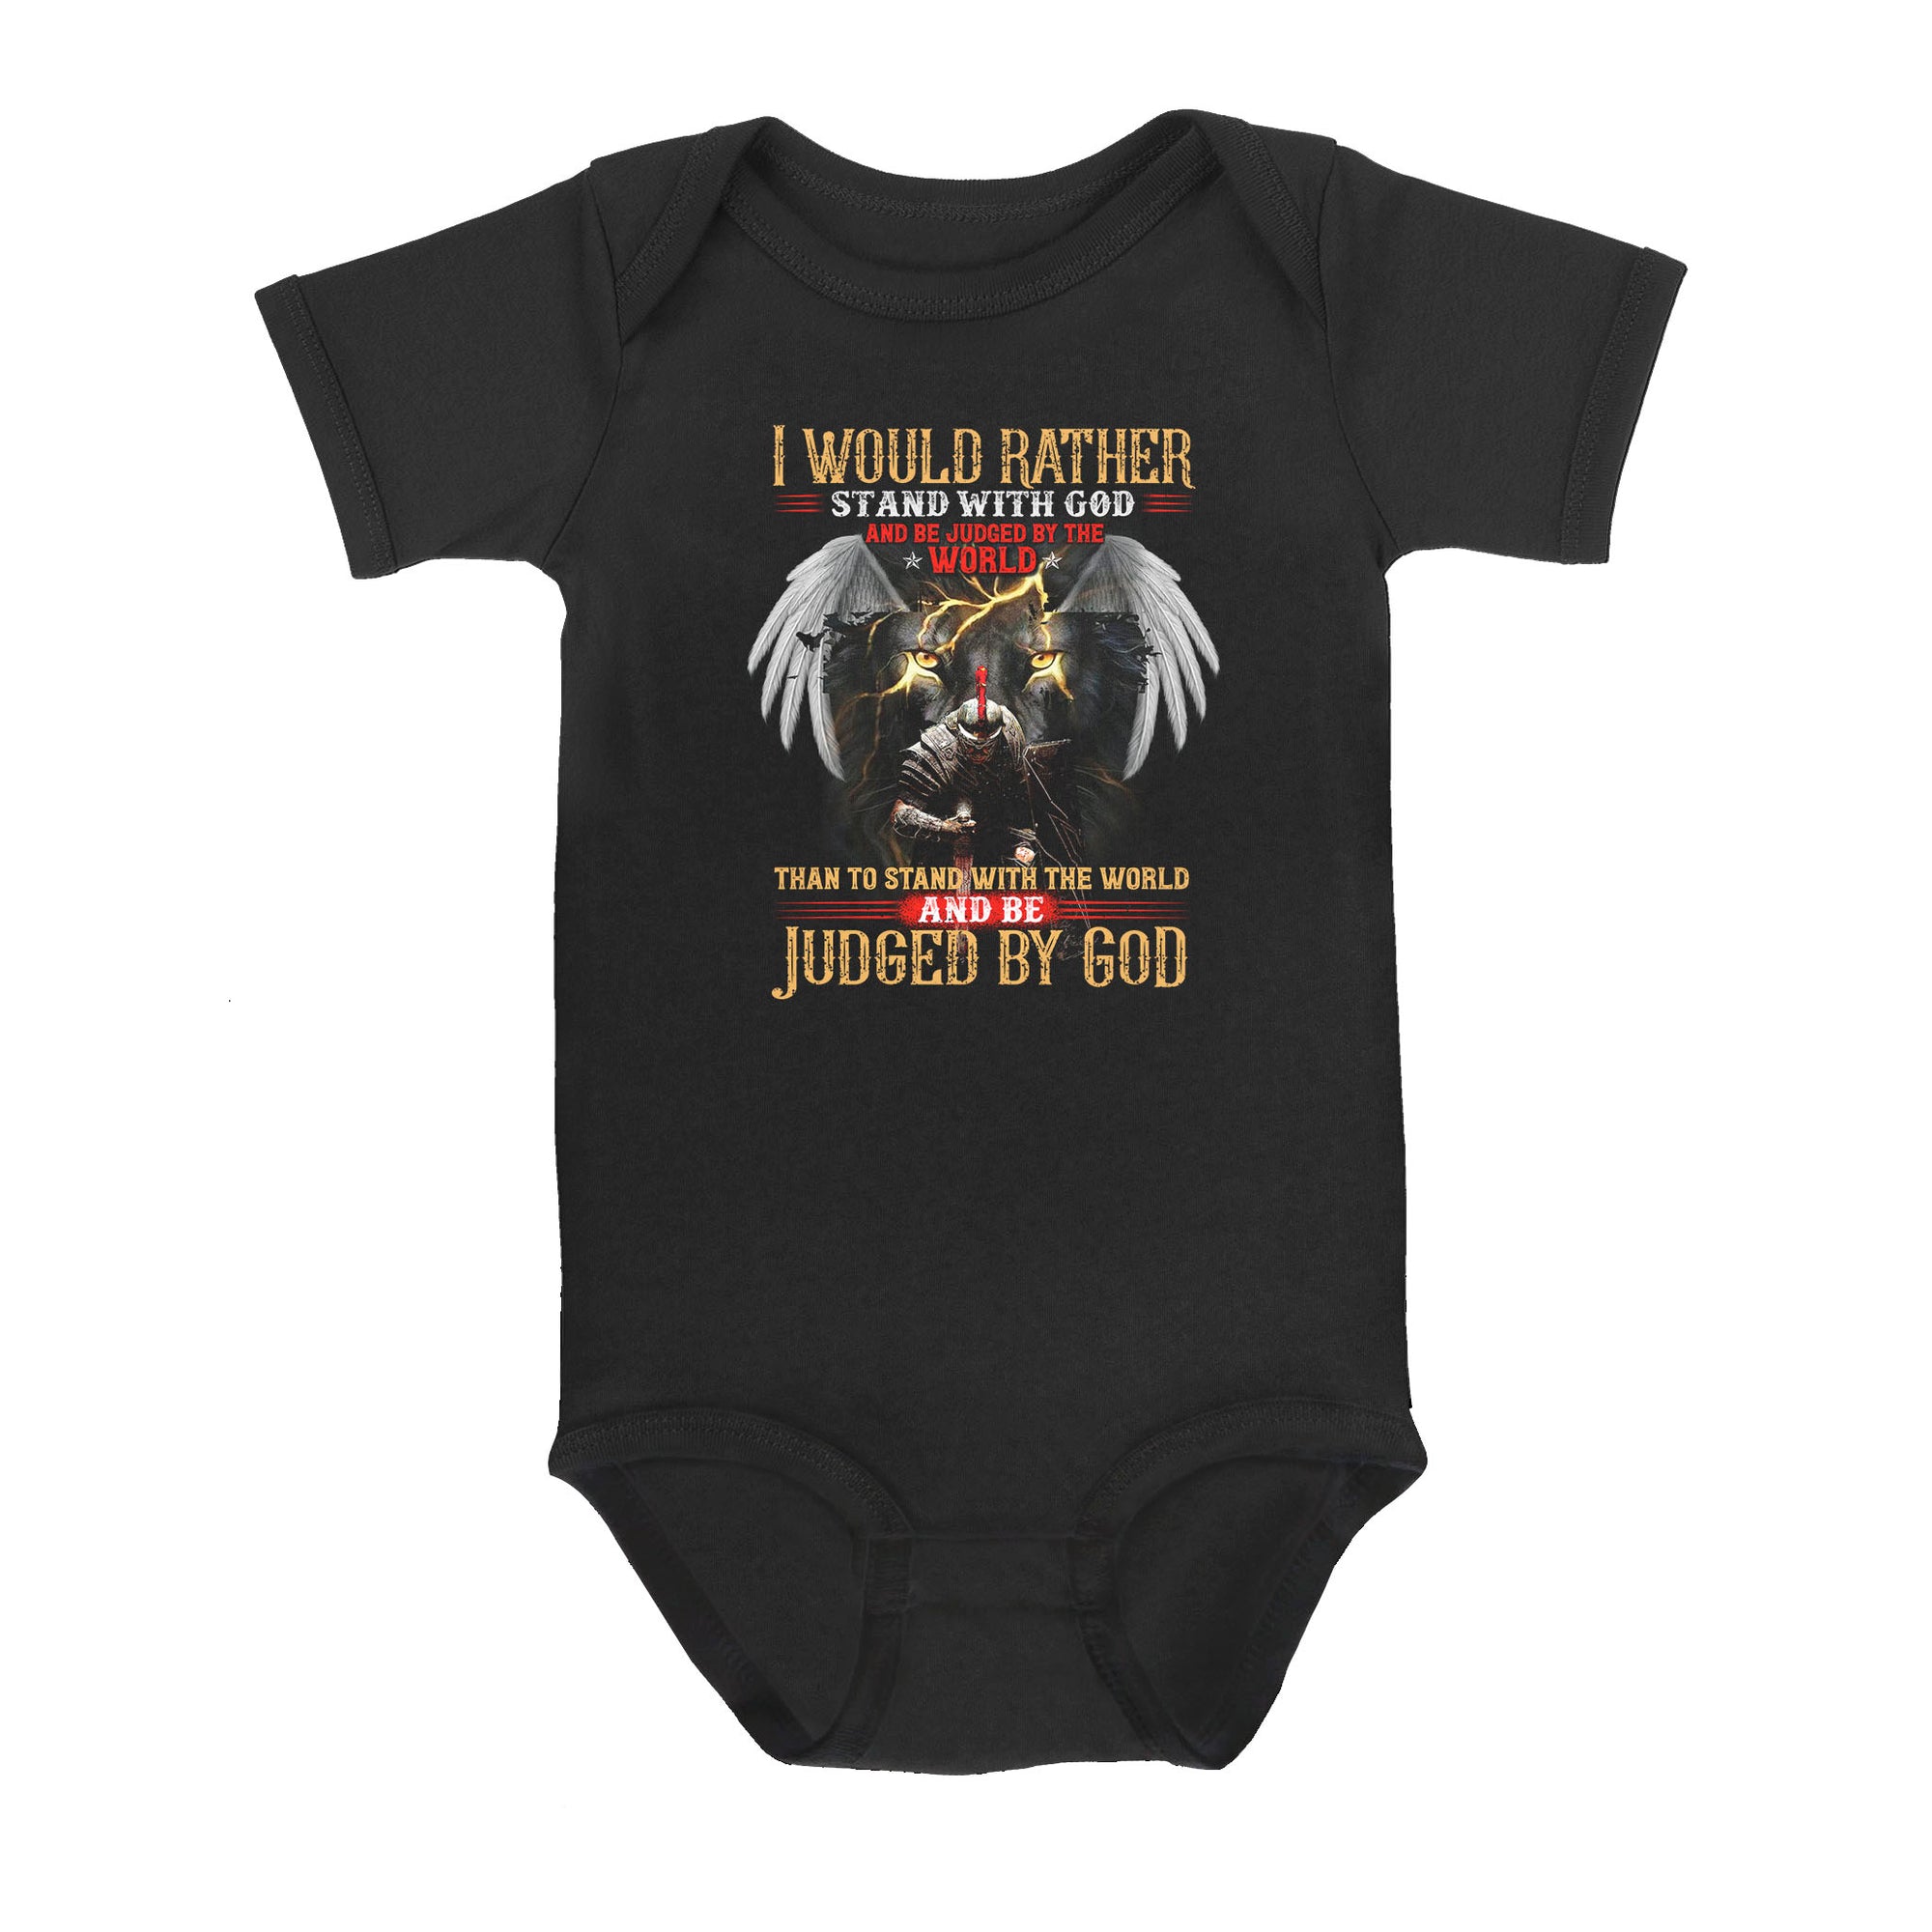 I Would Rather Stand With God And Be Judged By The World Than To Stand With The World And Be Judged By God - Baby Onesie